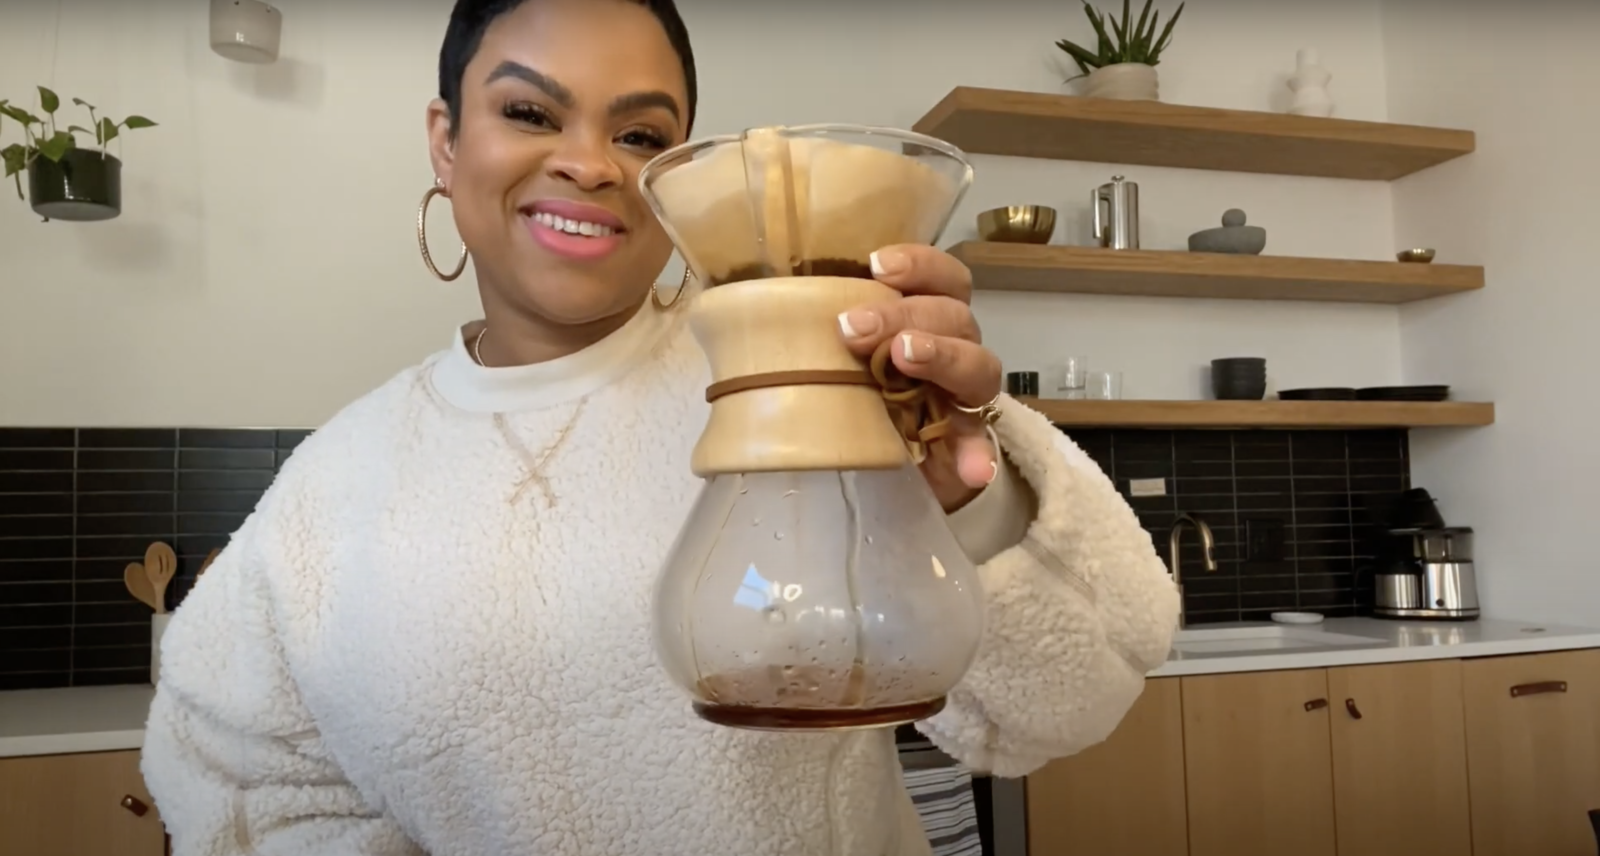 woman holding a chemex coffee brewer in her kitchen smiling